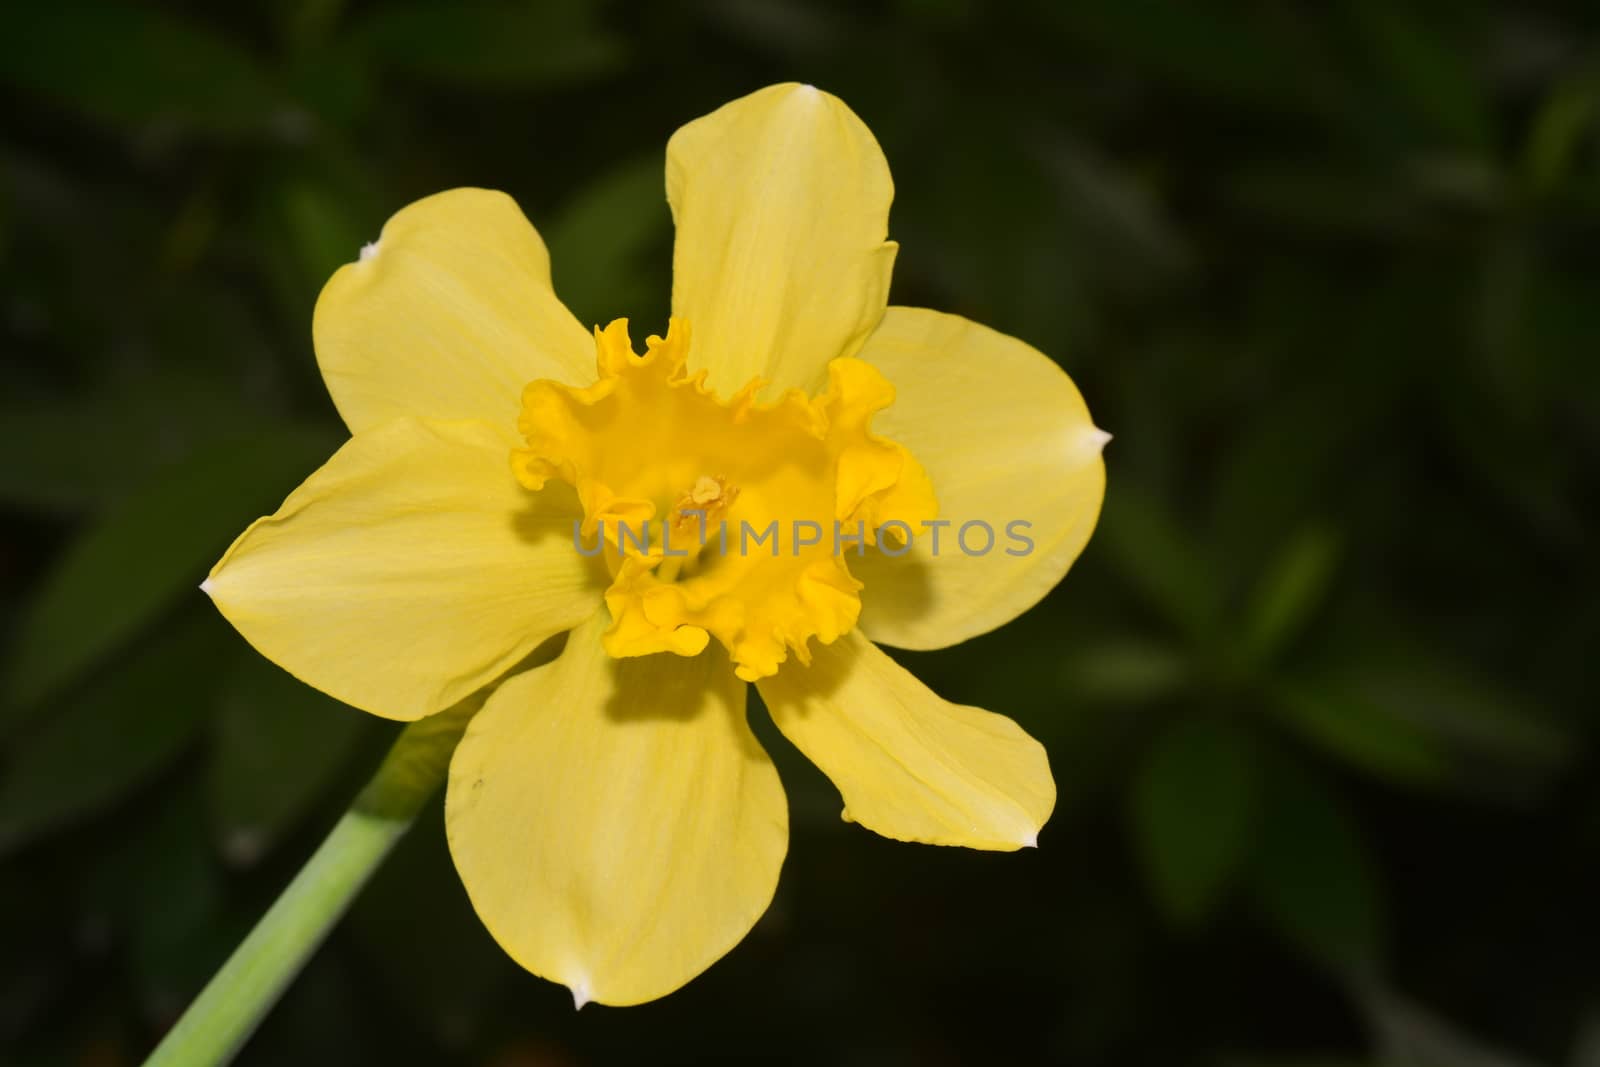 Daffodils, the flowers symbolizing friendship, are some of the most popular flowers exclusively due to their unmatched beauty